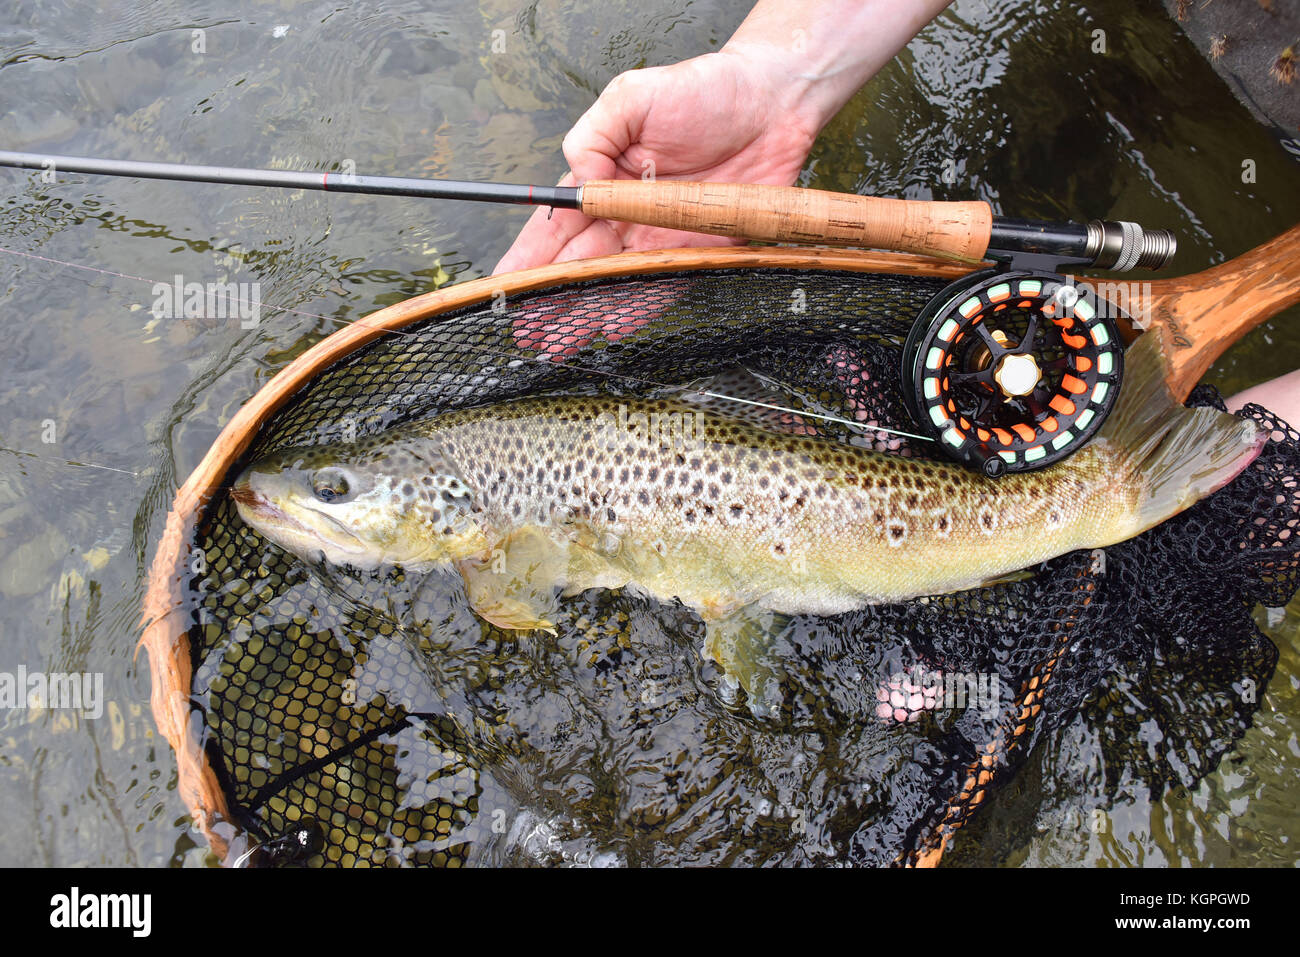 Closeup of brown trout fish, net, fishing rod, set by river Stock Photo